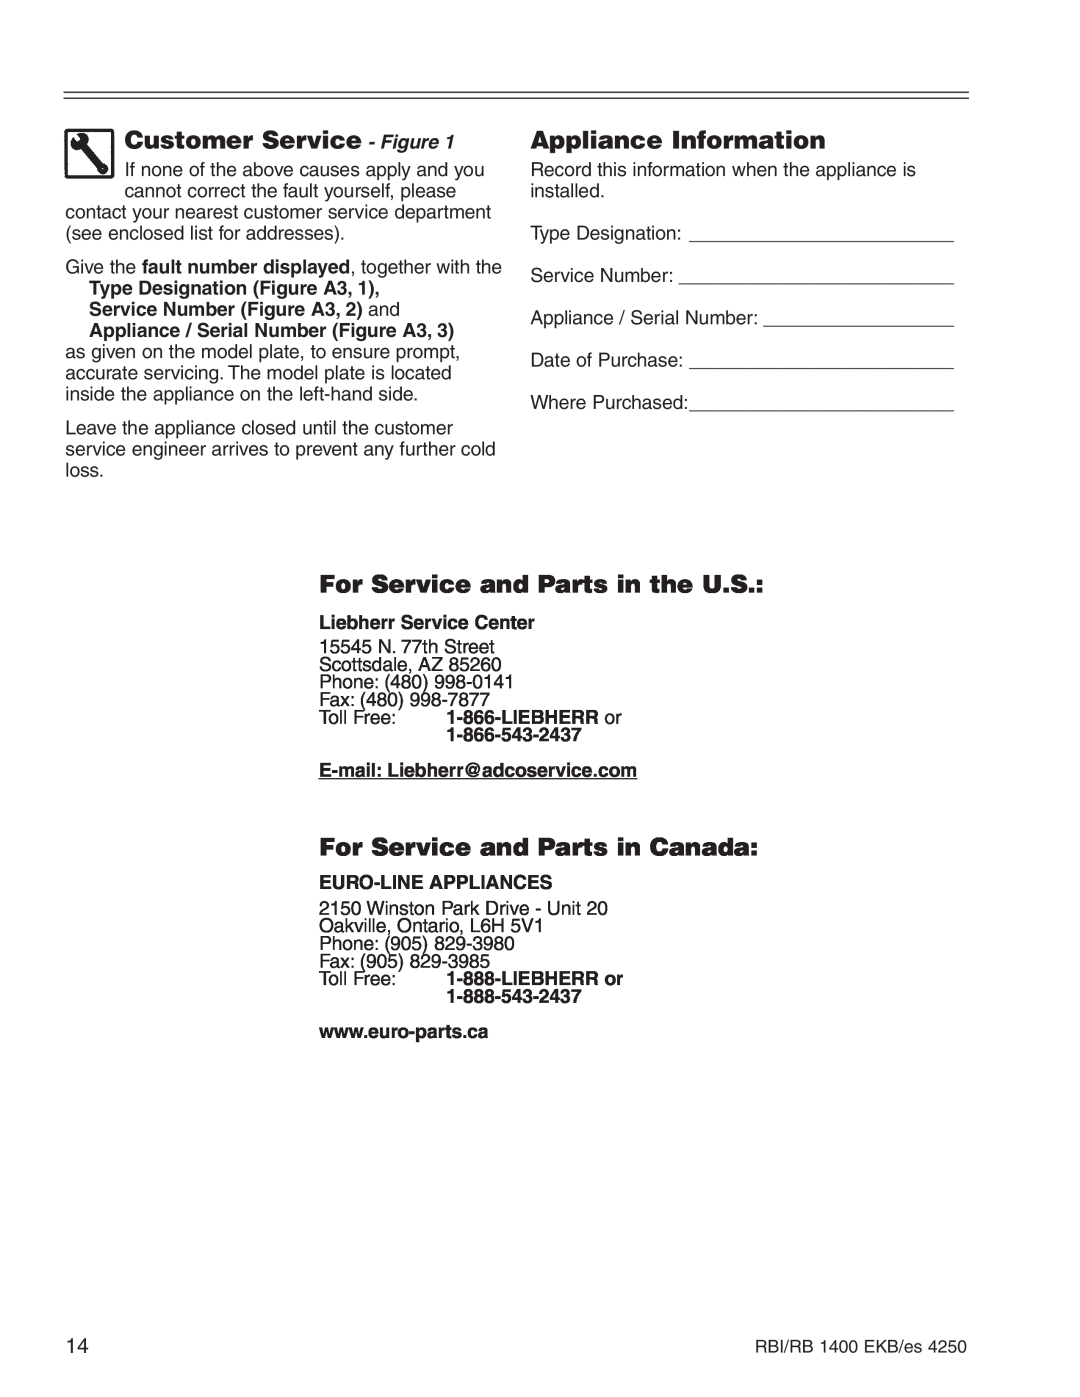 Liebherr EKB/es 4250 0406, RB 1400 Customer Service - Figure, Appliance Information, For Service and Parts in the U.S 